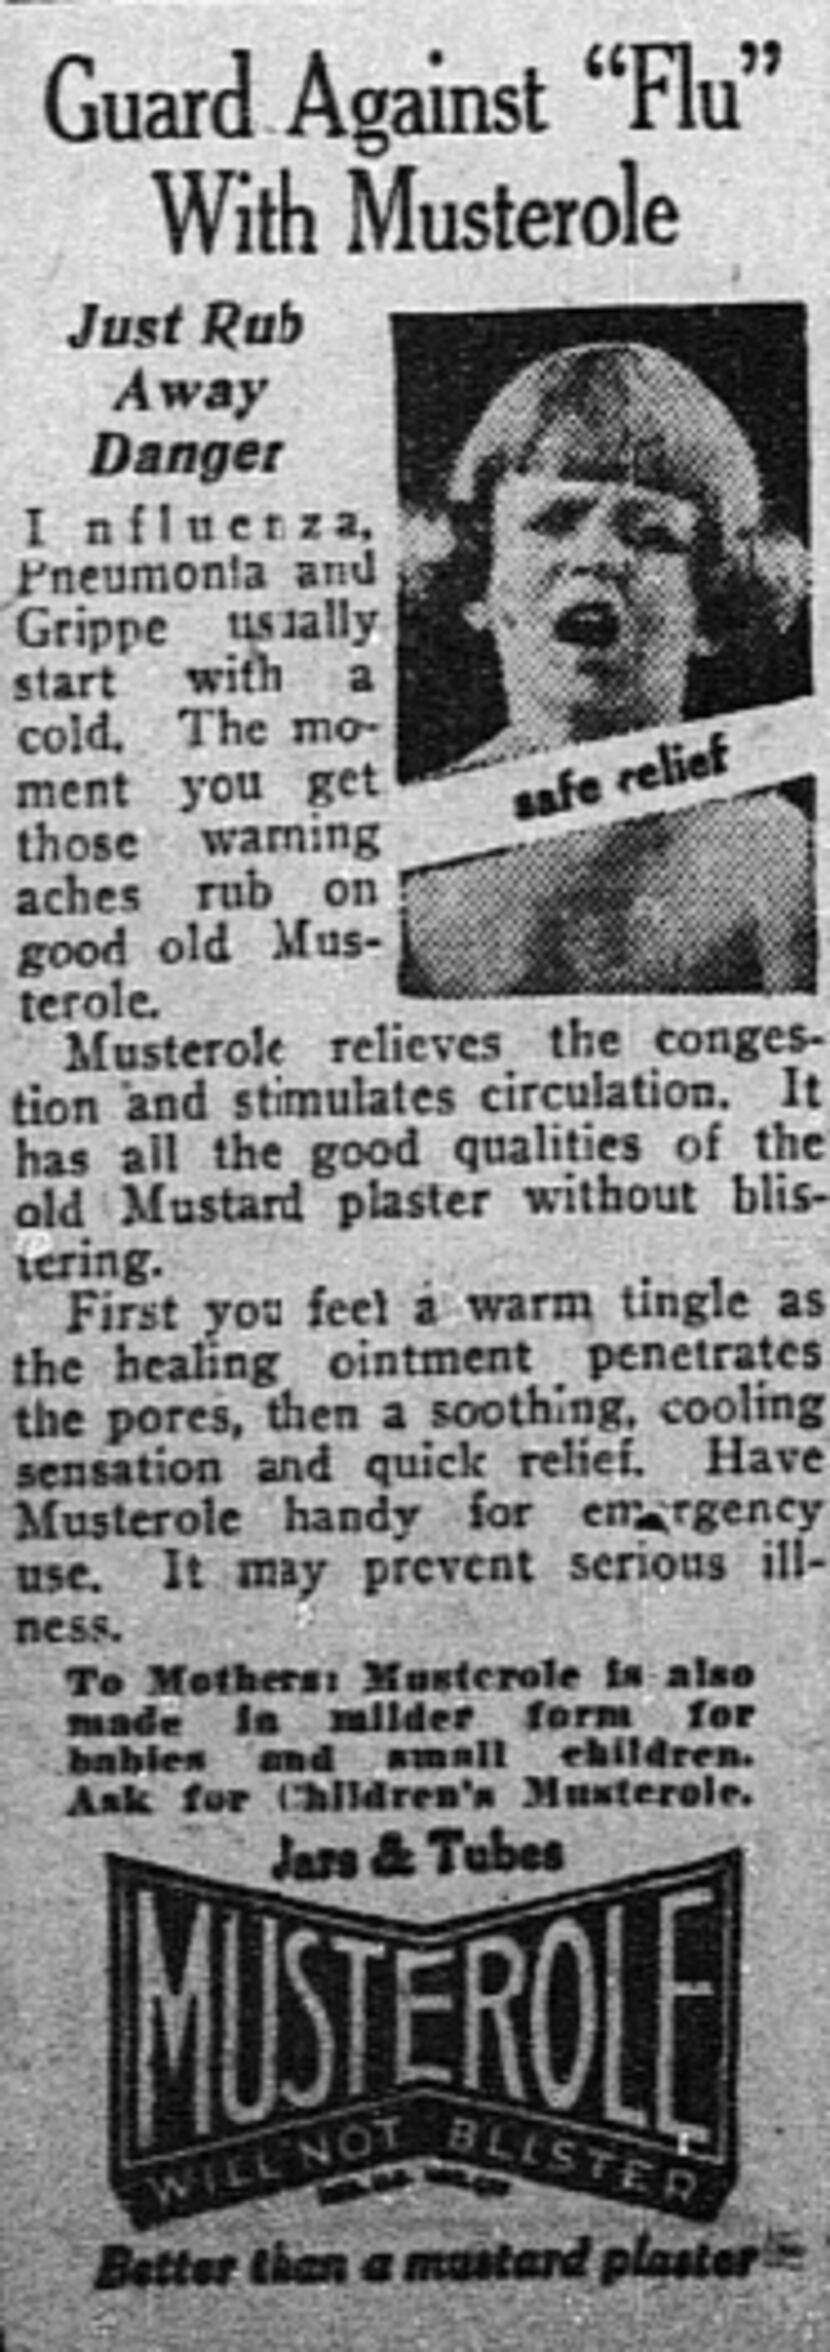 1927: "Good old Musterole," which was advertised as "better than a mustard plaster," was a...